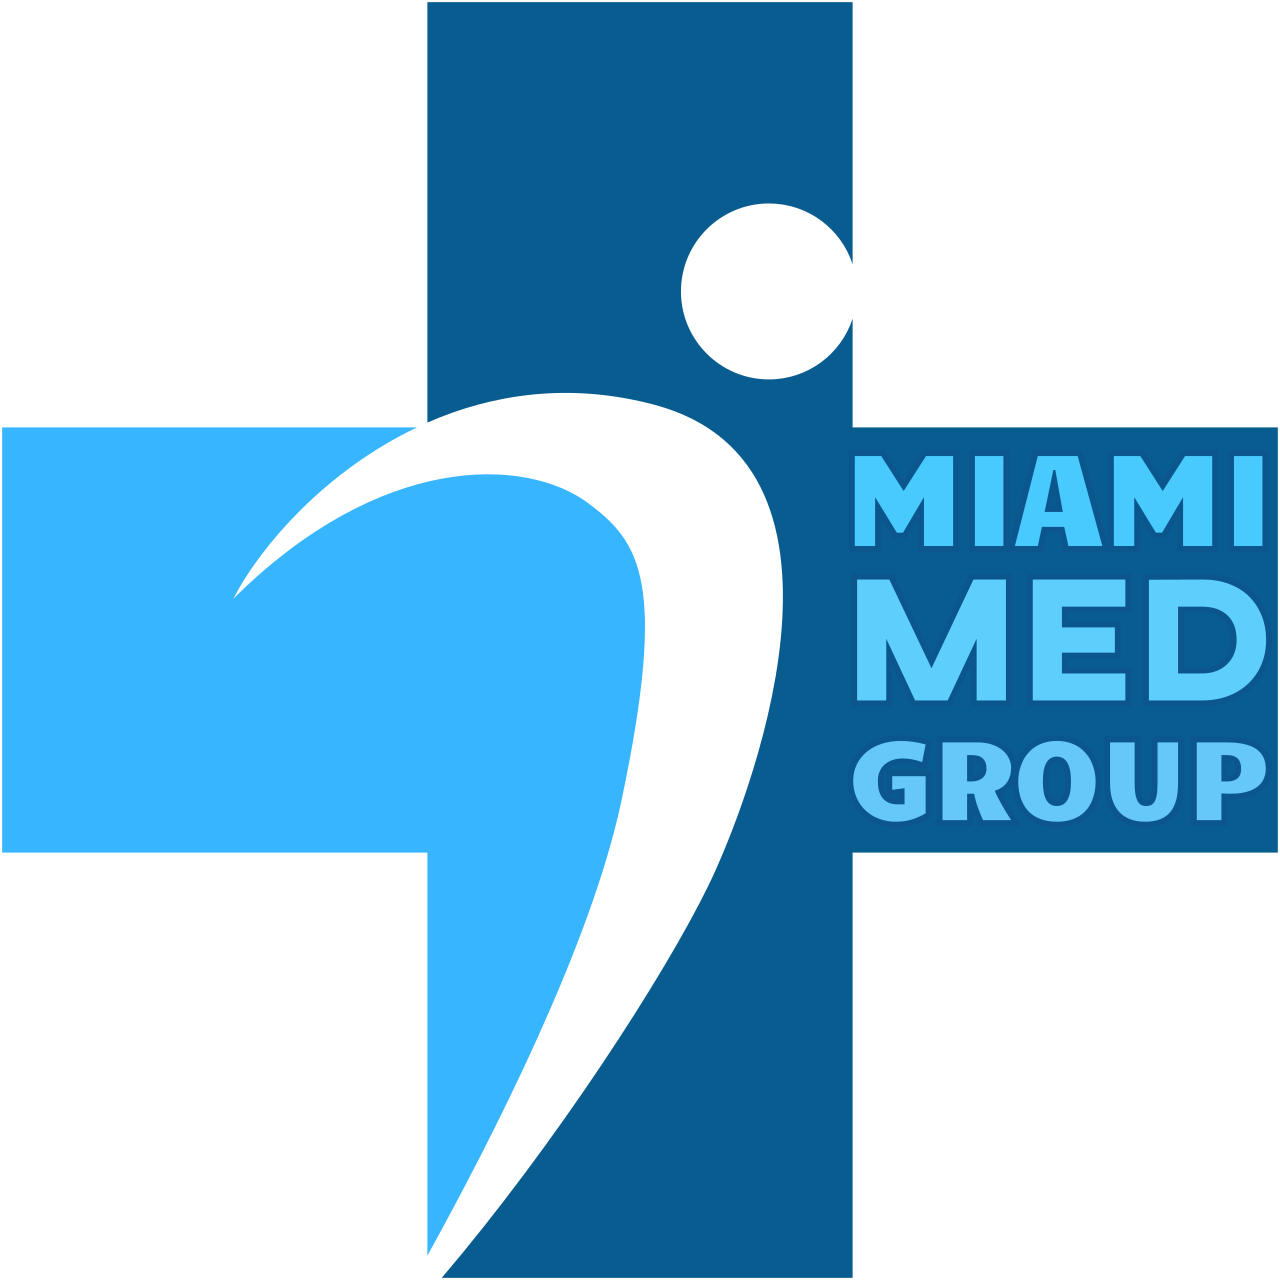 Miami MED Group's web page